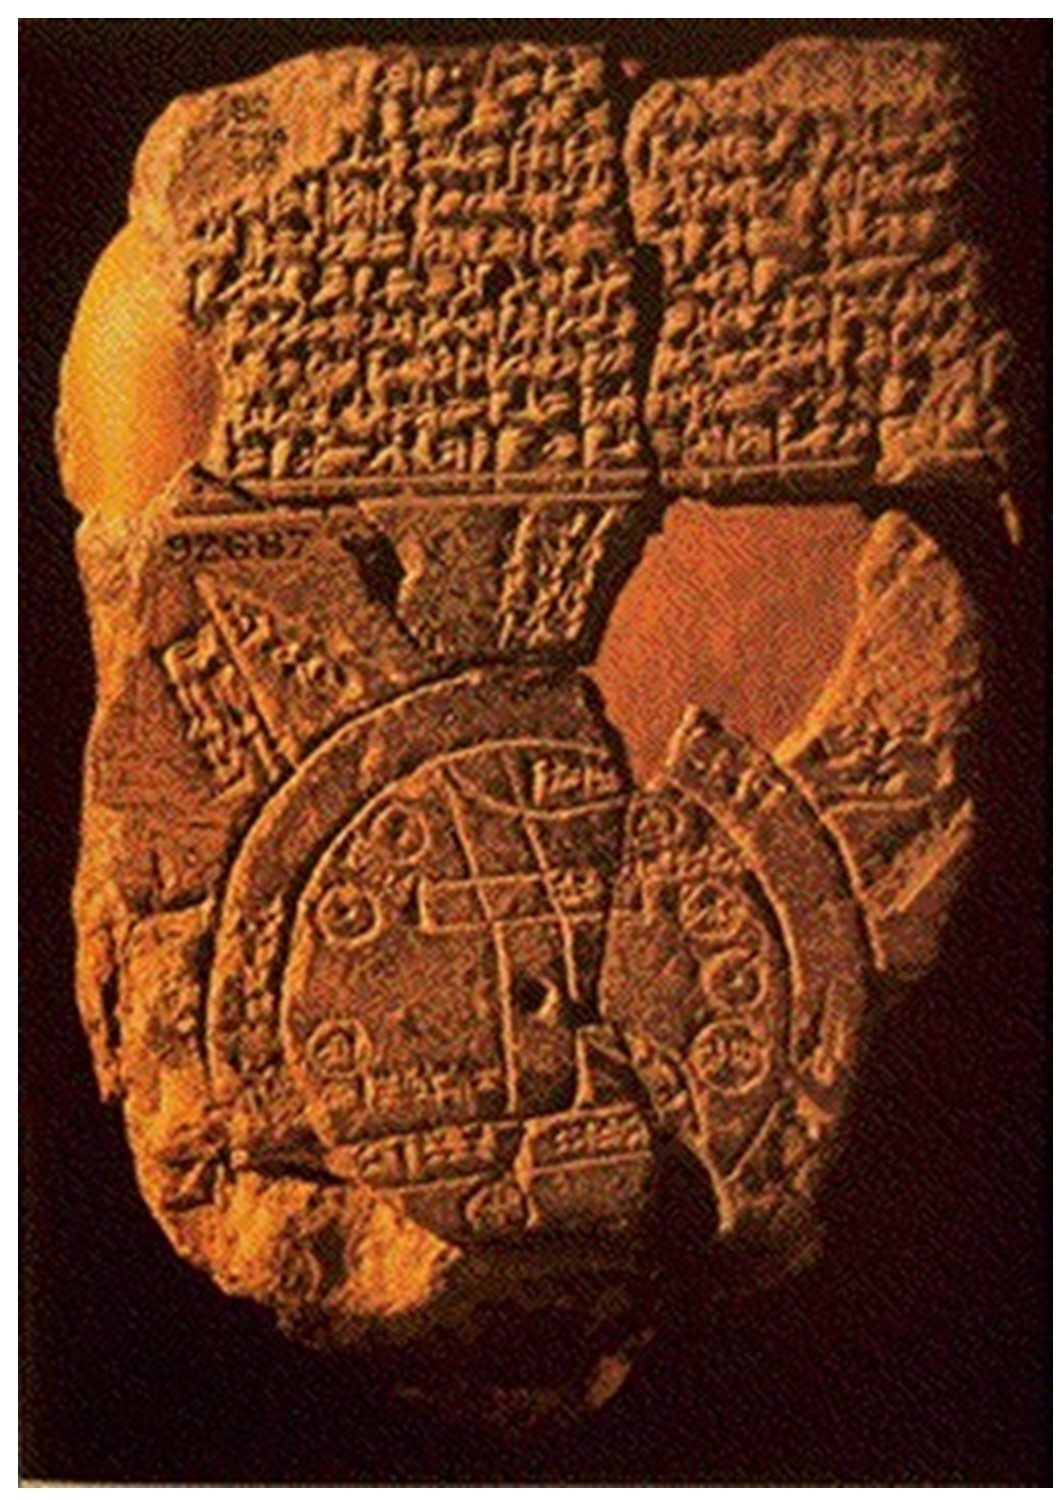 A map carved from stone made around 600 BCE.